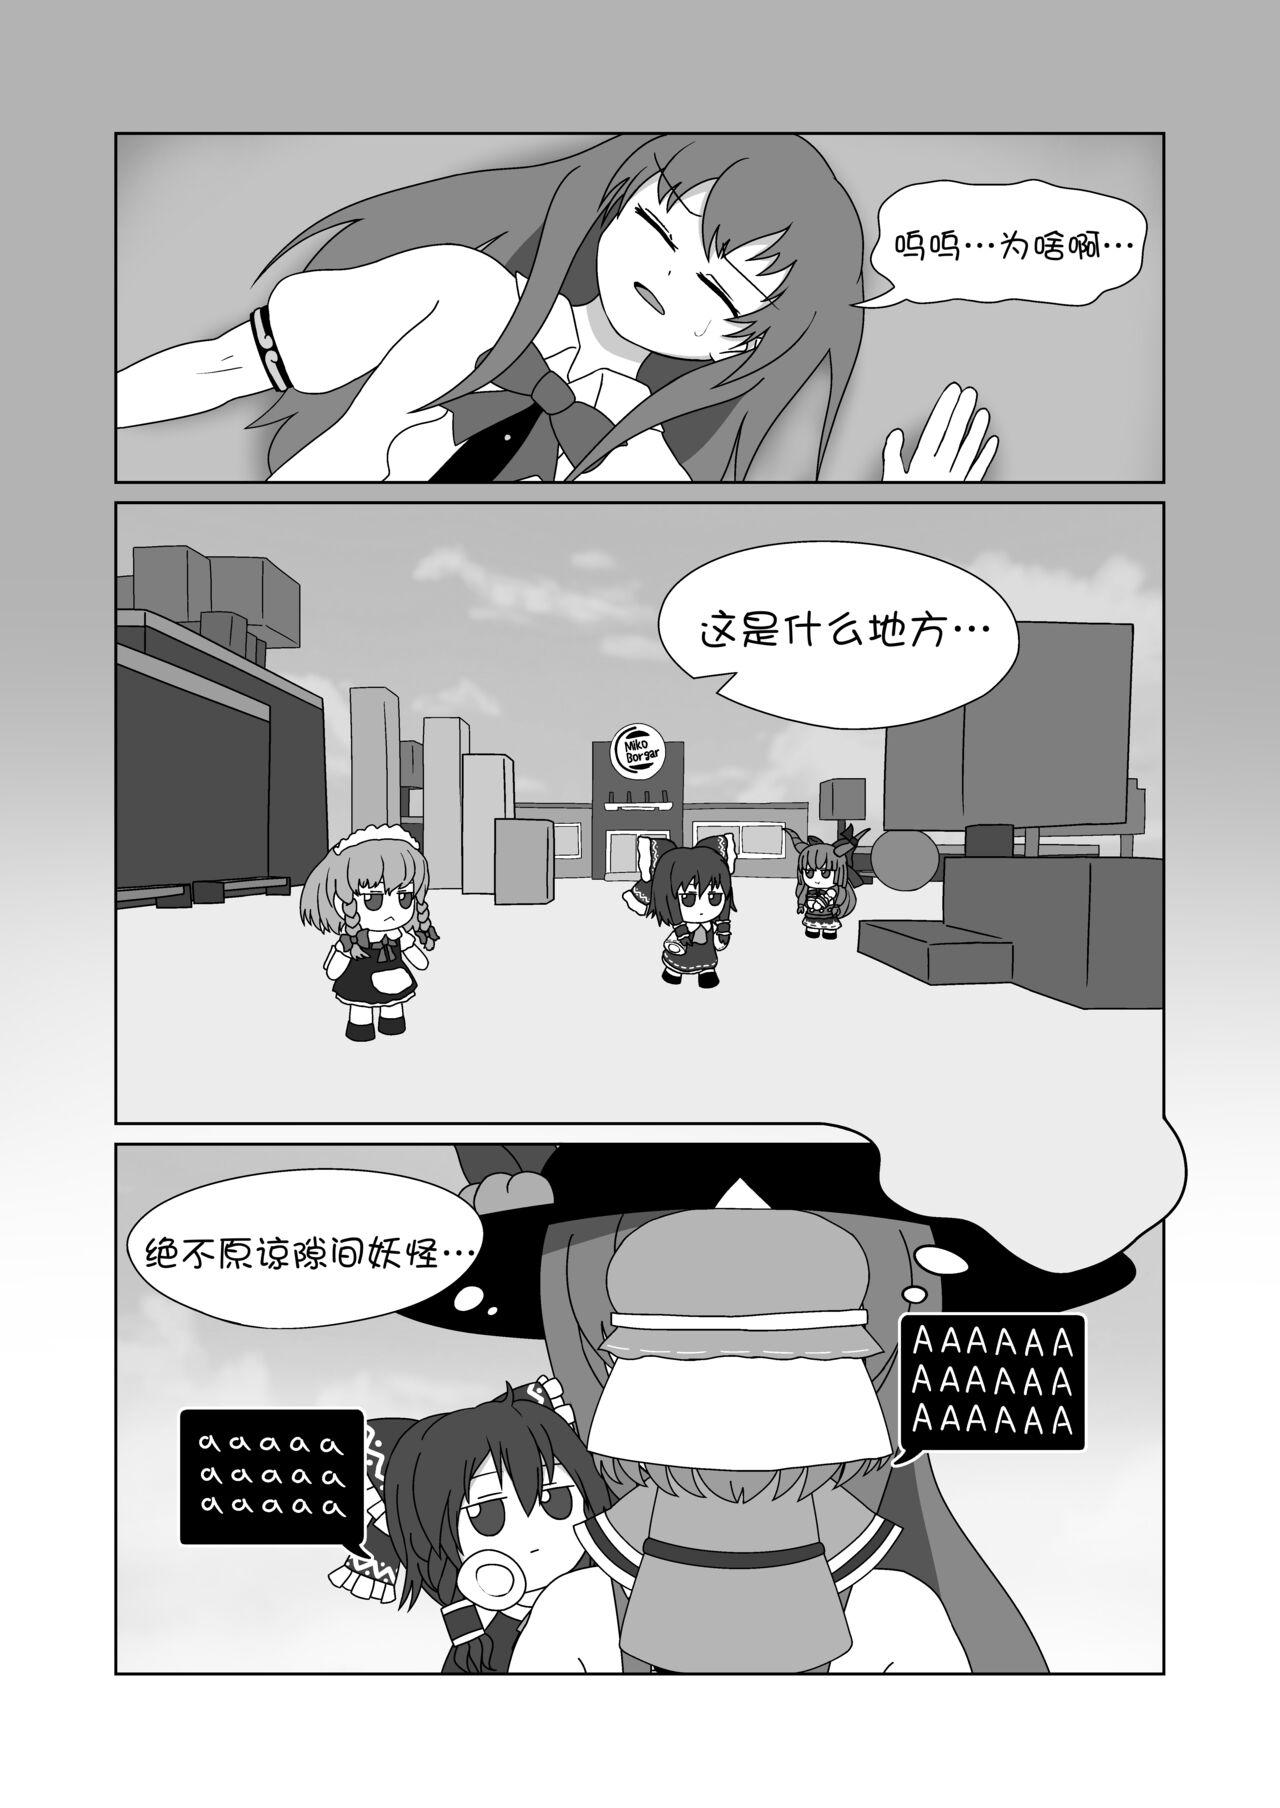 Fellatio 天子 in BecomeFumo - Touhou project Lesbos - Page 5